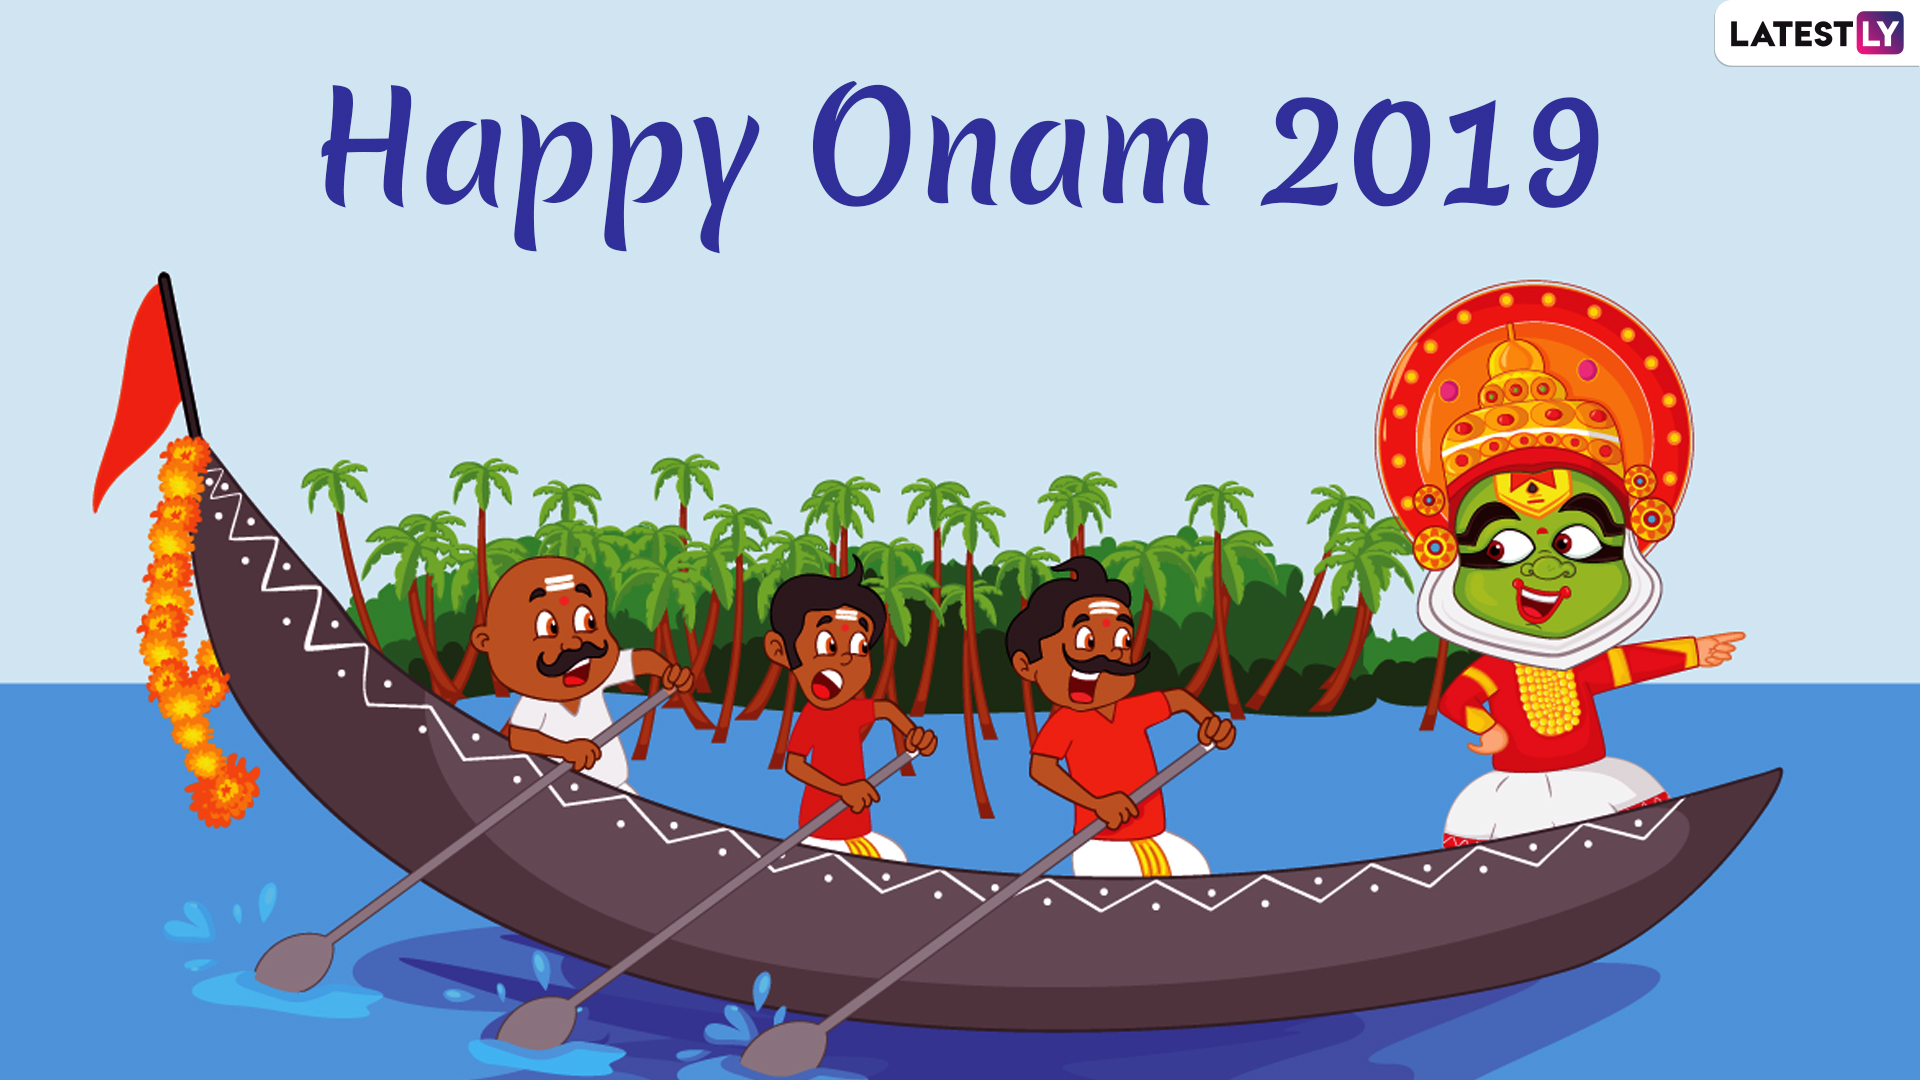 Onam 2019 Images & HD Wallpapers for Free Download Online: Wish Happy Onam With Beautiful ...